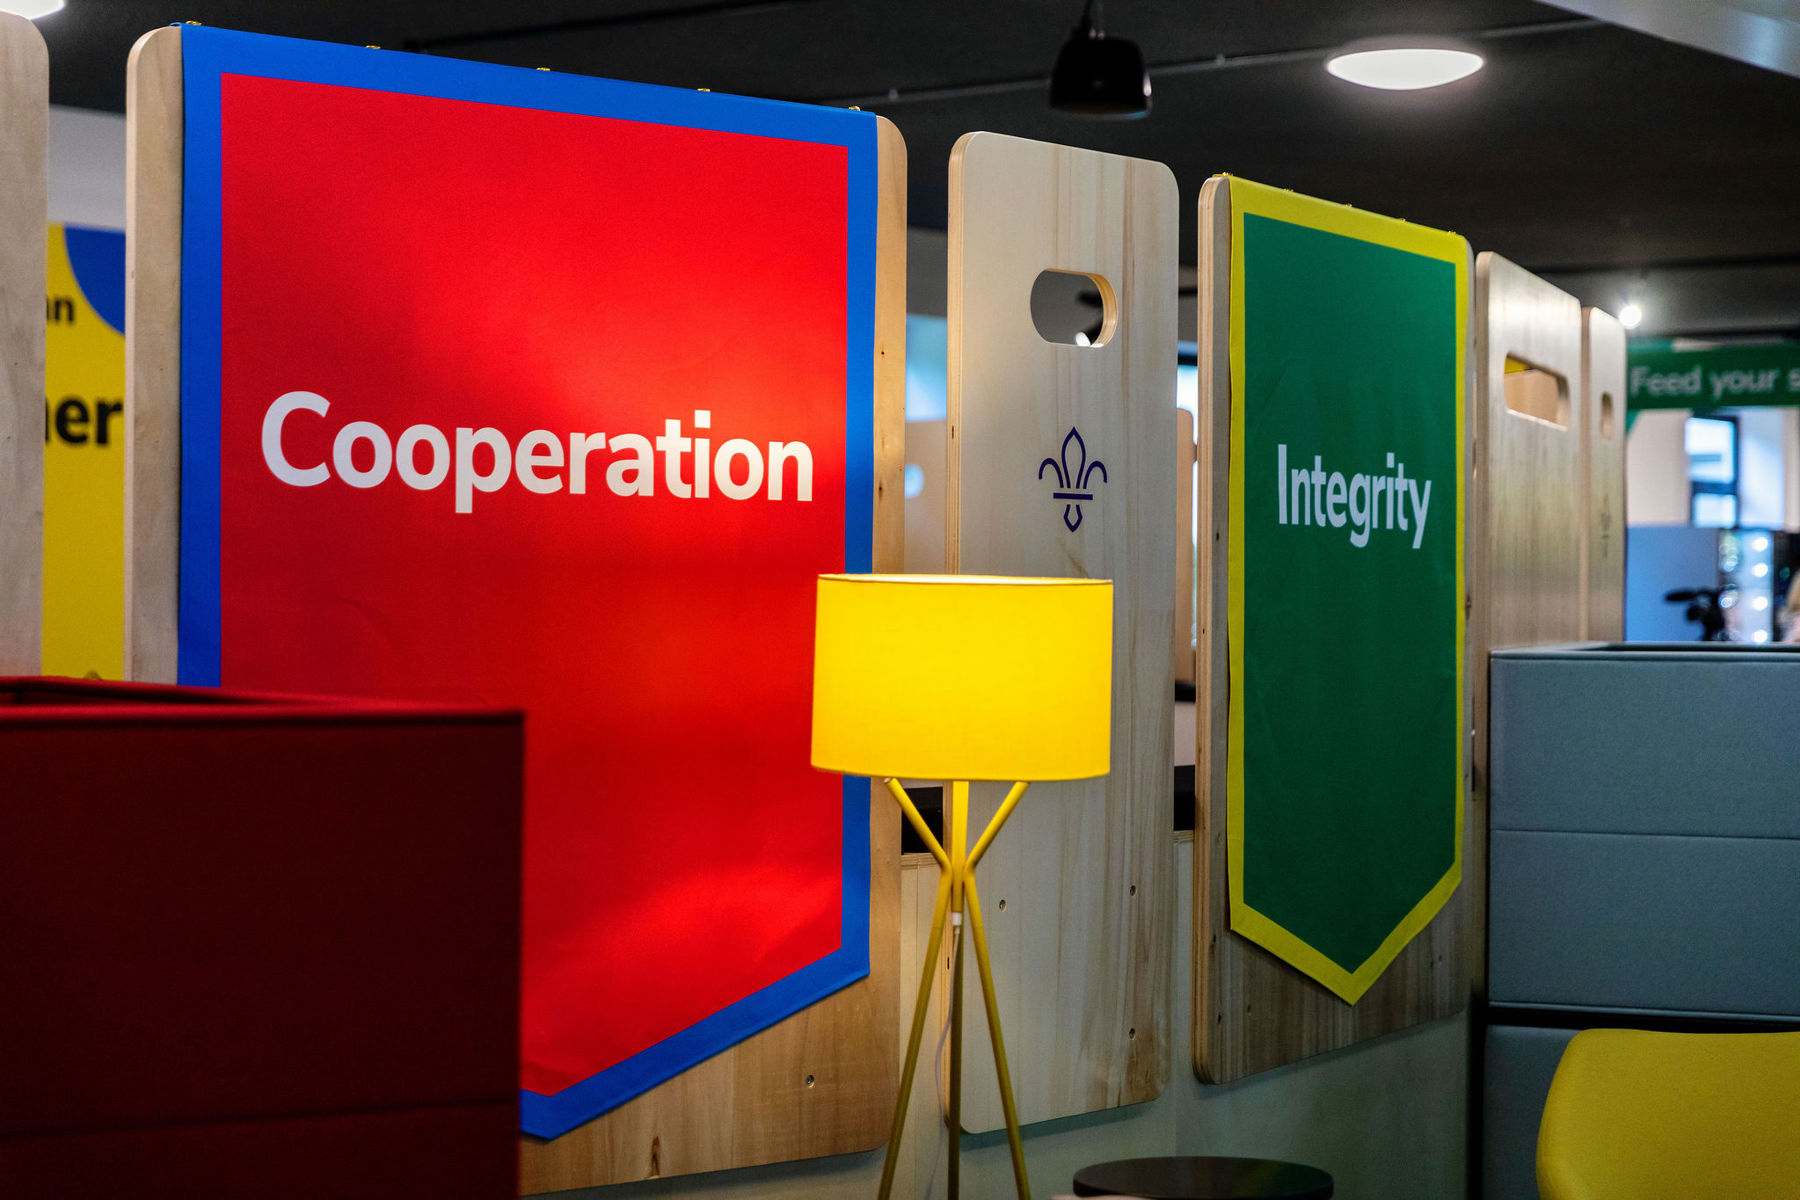 Cooperation and Integrity written on the walls in the colourful Gilwell space